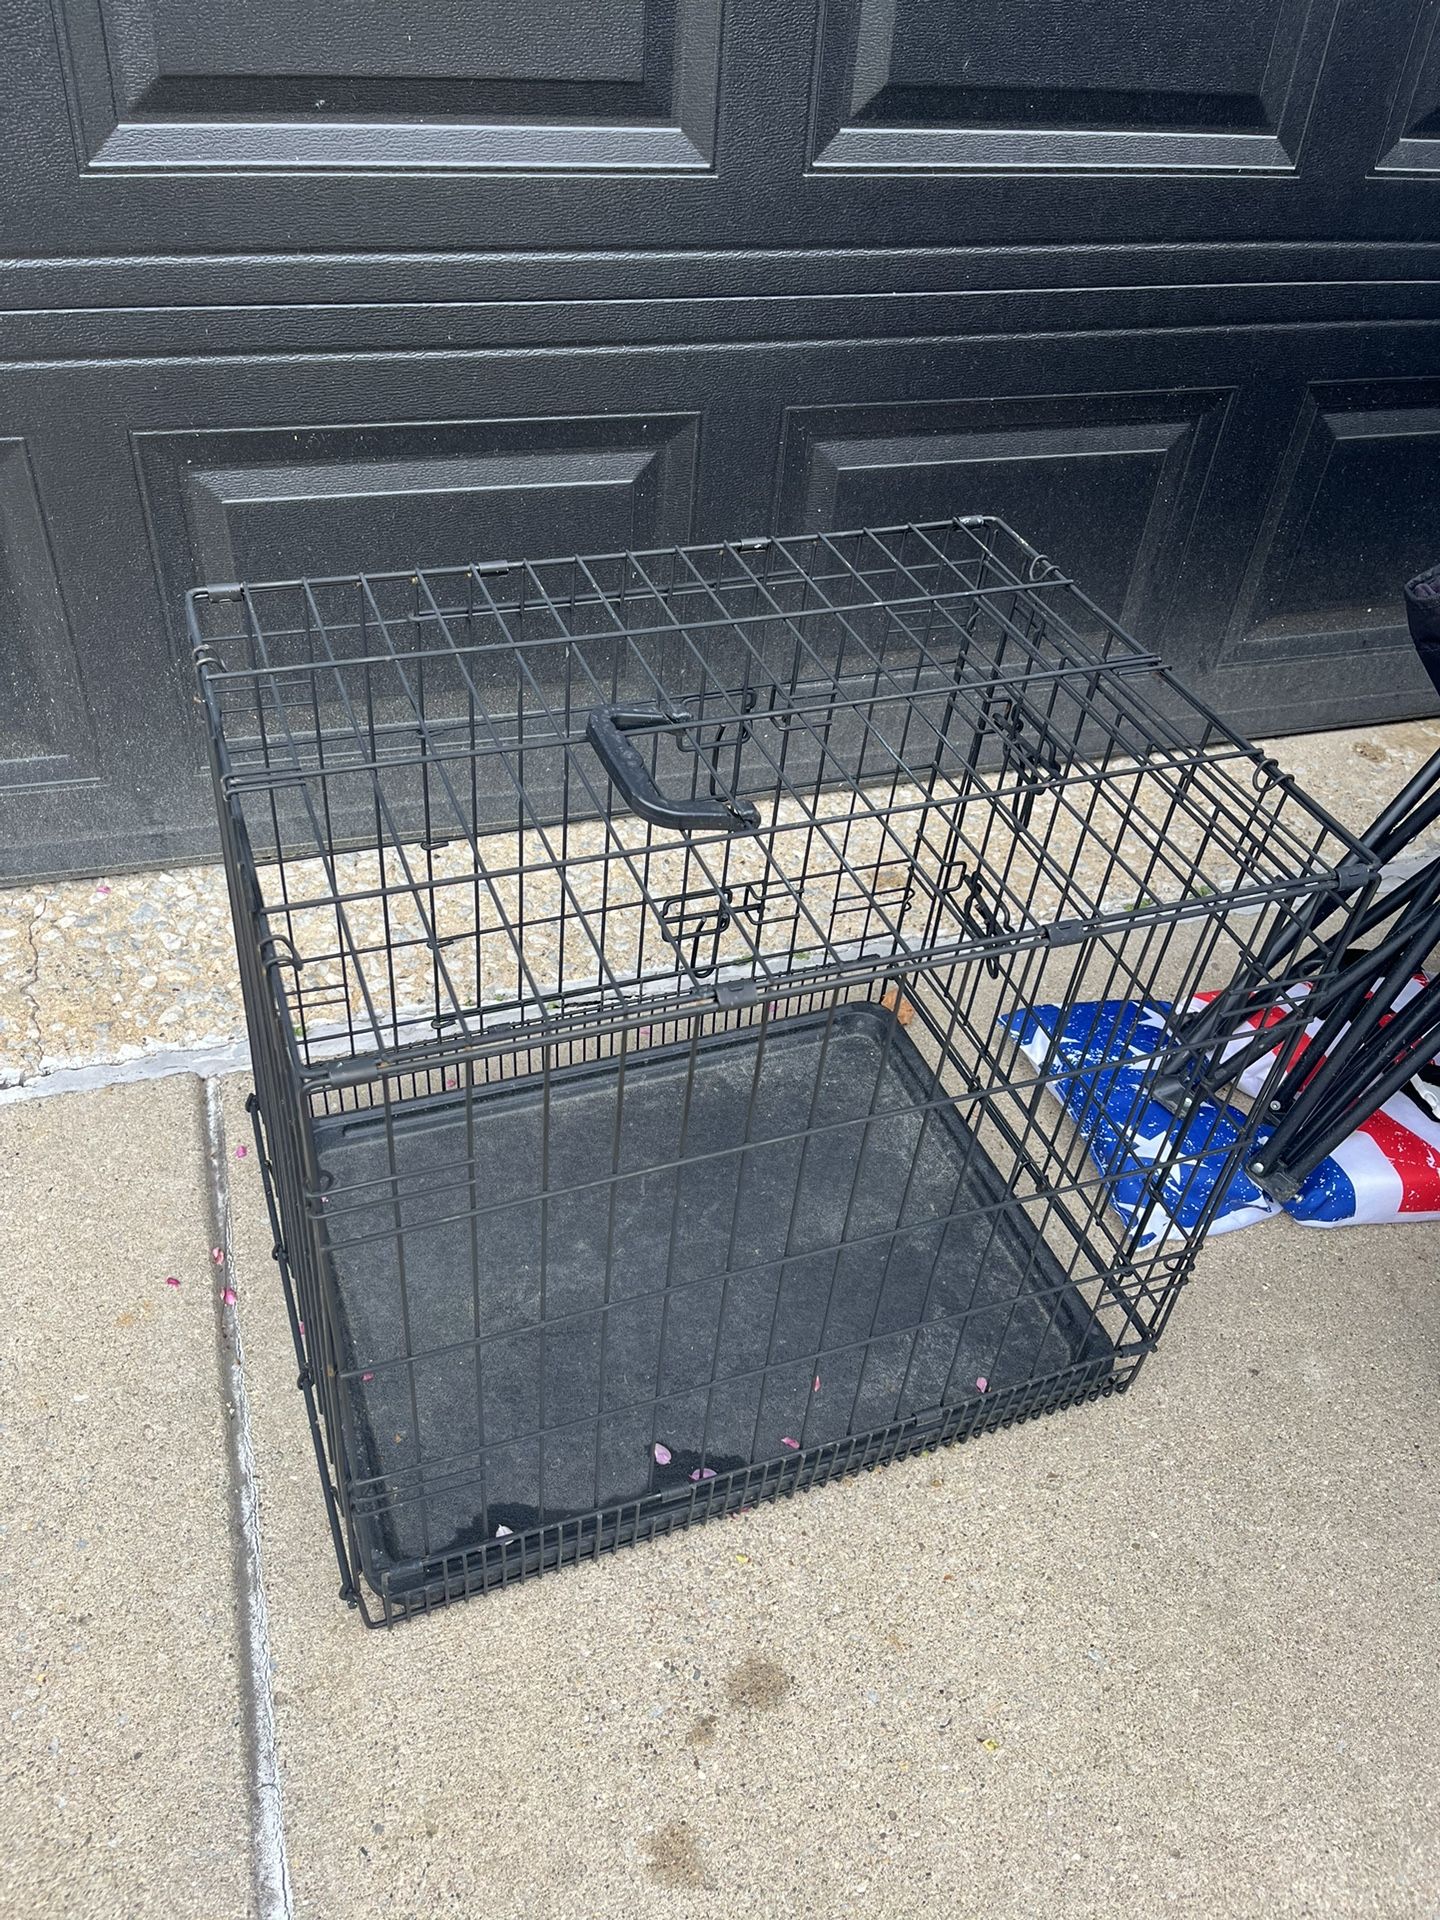 Two Opening Dog Crate